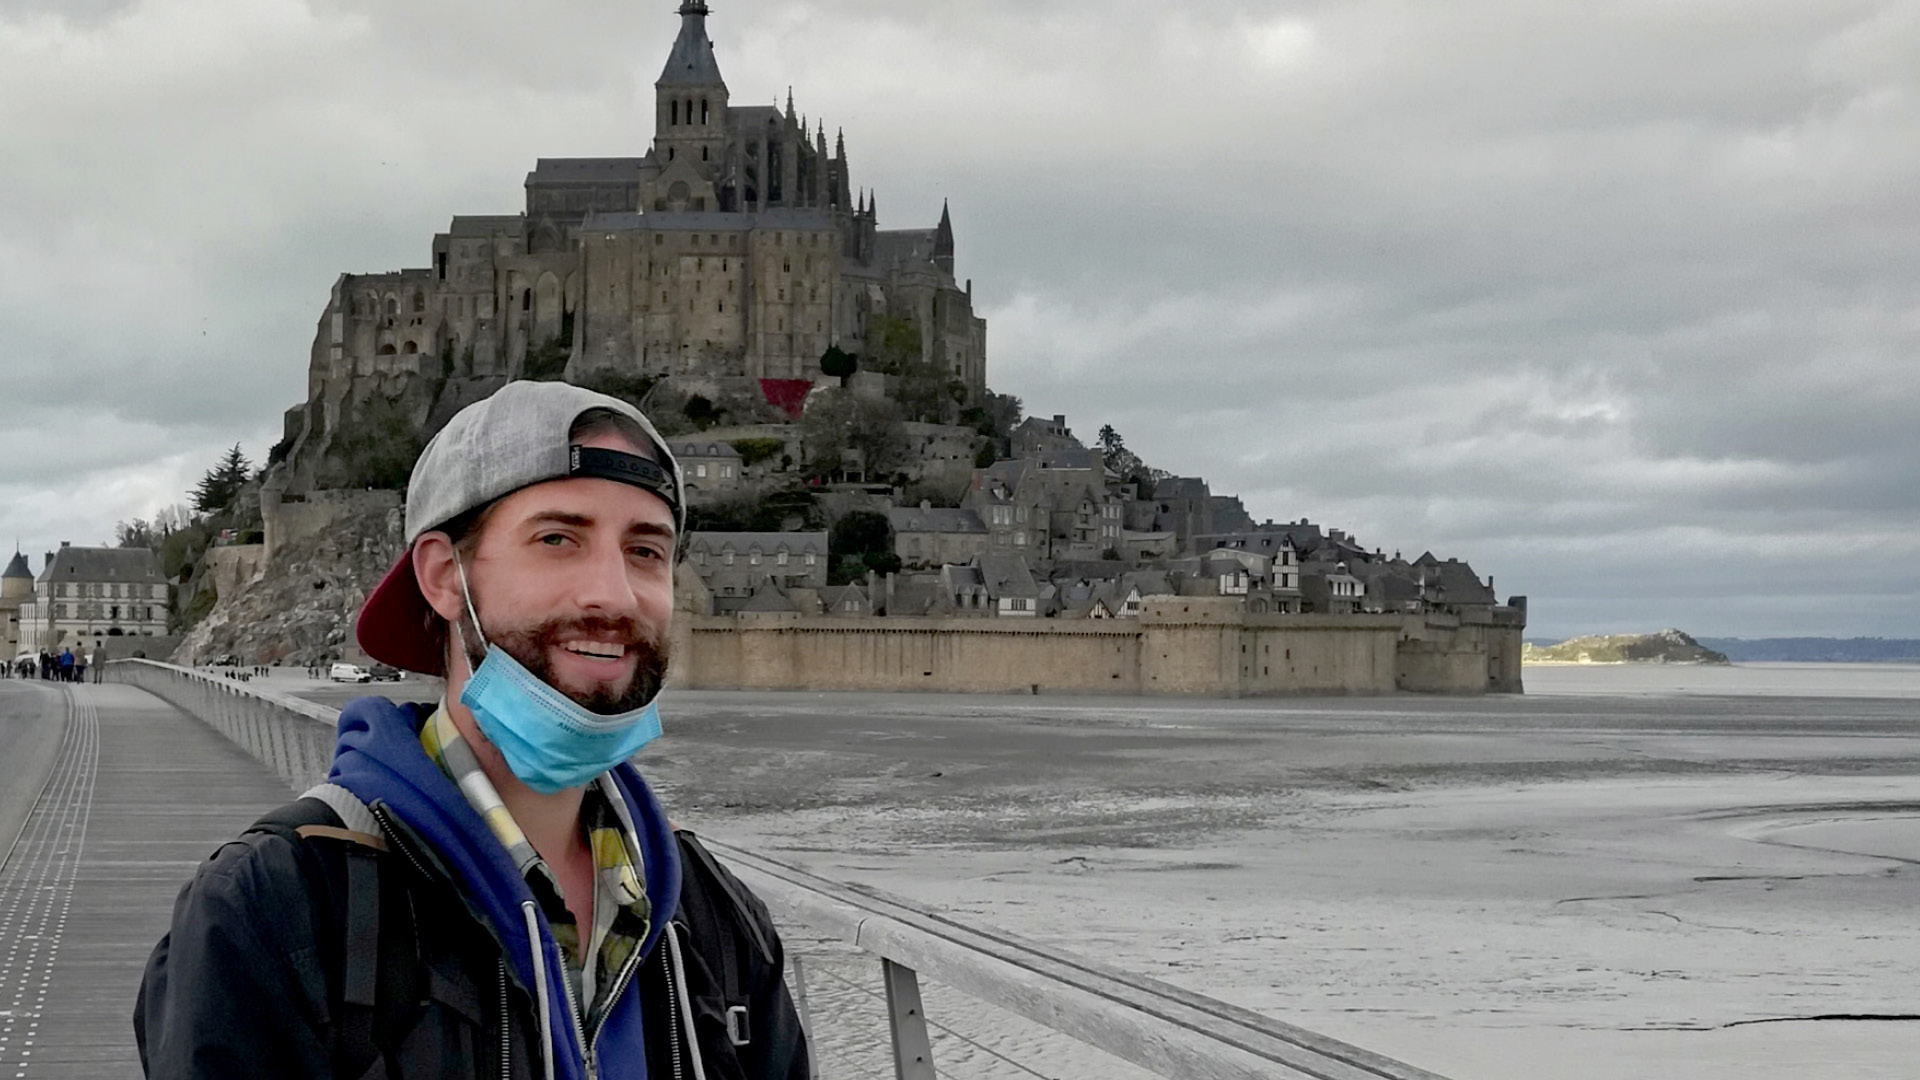 Our MCiT Master‘s student Andrew Smith reports from his exchange semester in Rennes, France.